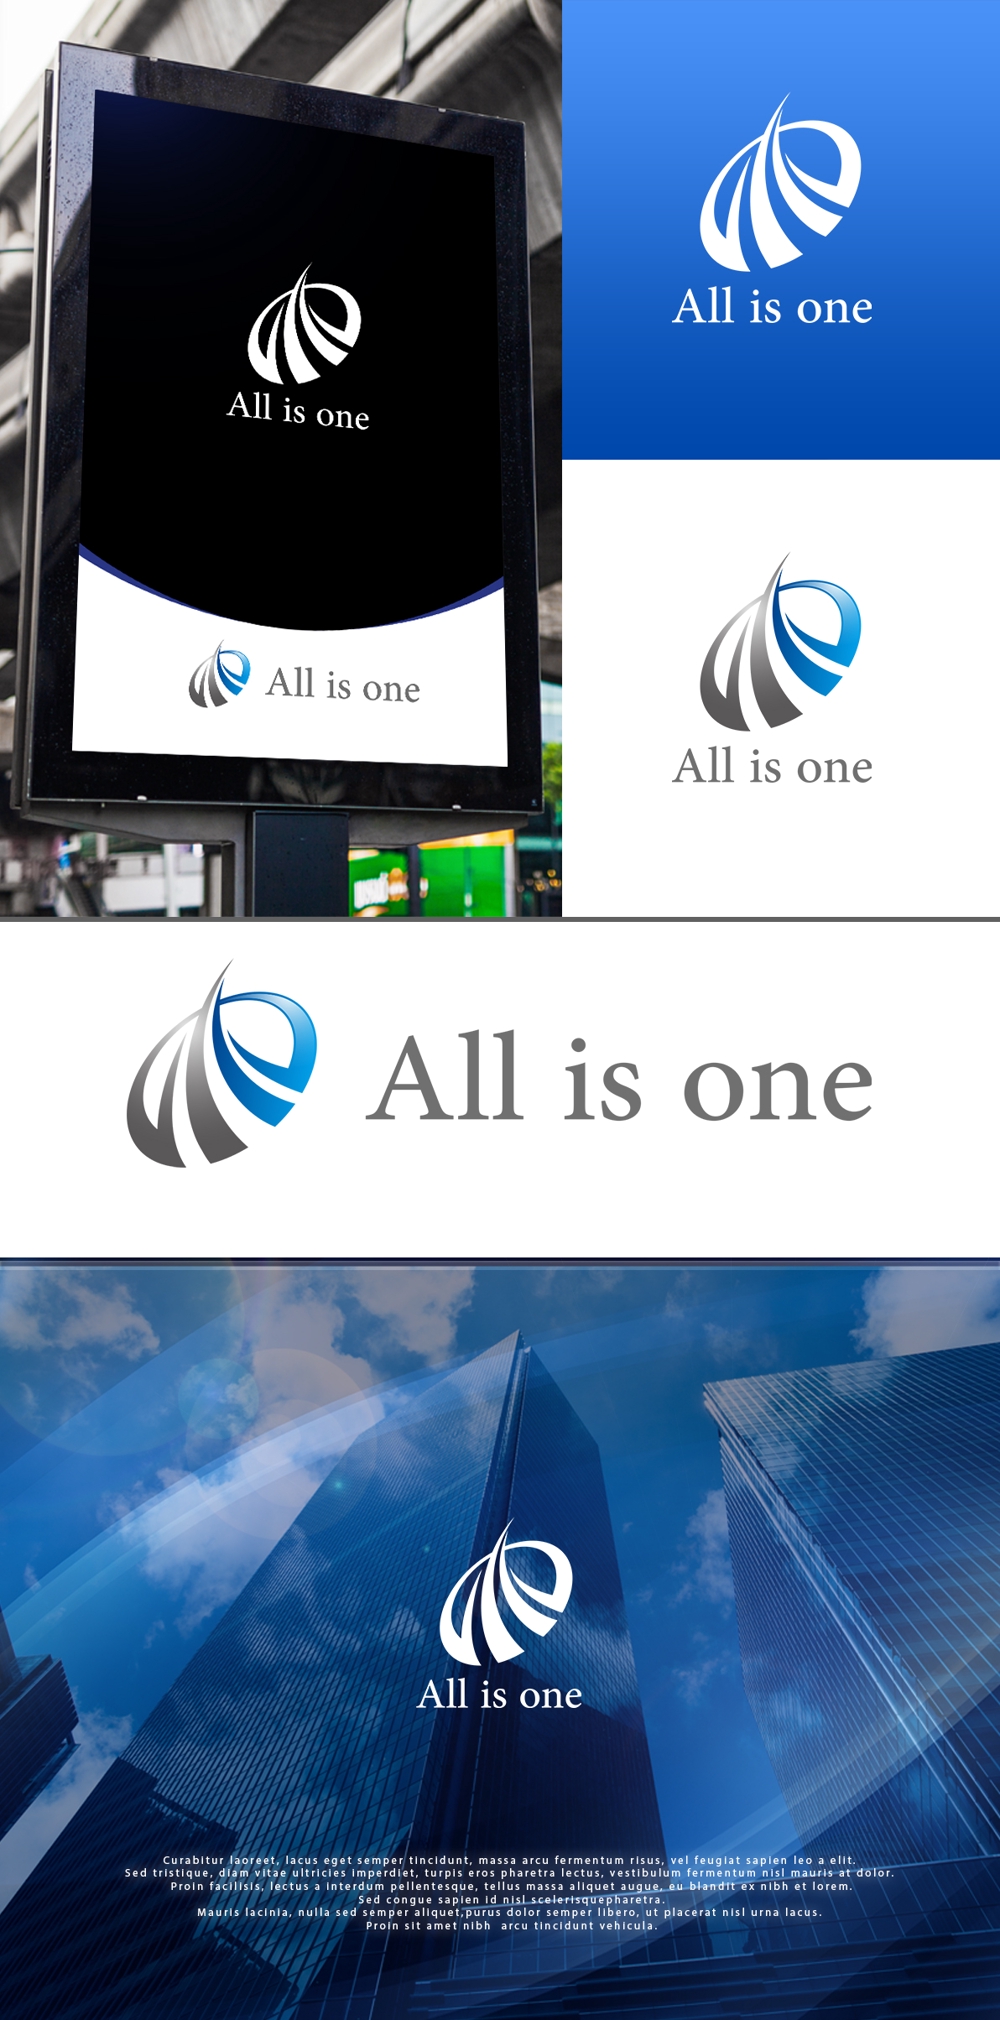 All-is-one1.jpg